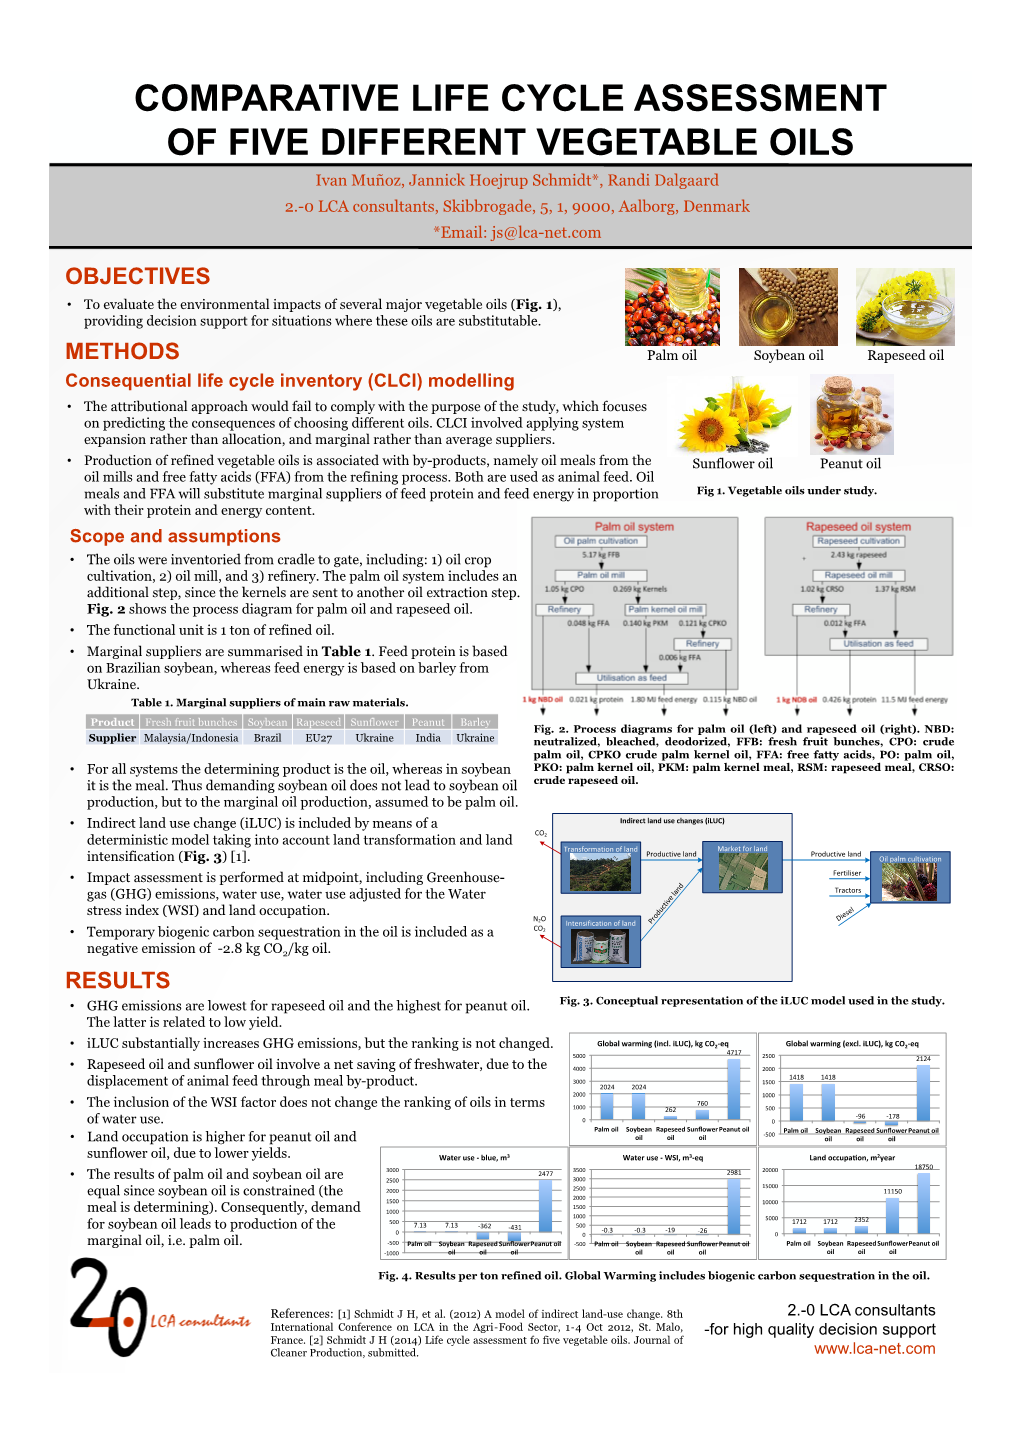 Comparative Life Cycle Assessment of Five Different Vegetable Oils